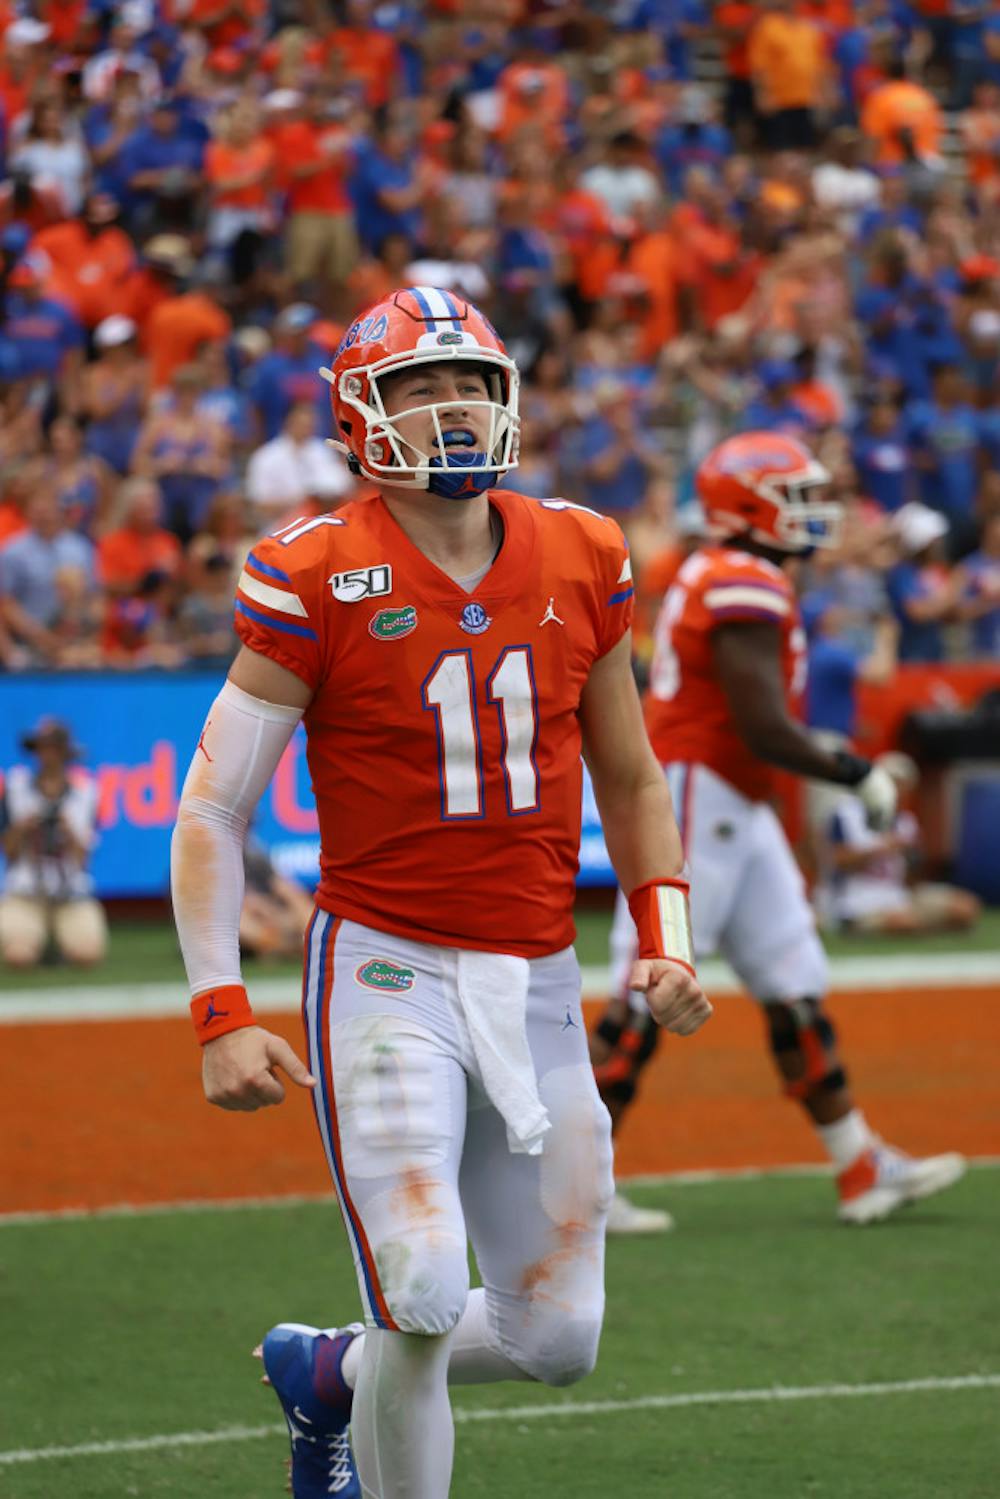 <p><span id="docs-internal-guid-836dcb60-7fff-1c2b-eb52-5978804487b8"><span>UF quarterback Kyle Trask connected with tight end Kyle Pitts for four touchdowns in Florida’s win over Ole Miss on Saturday.</span></span></p>